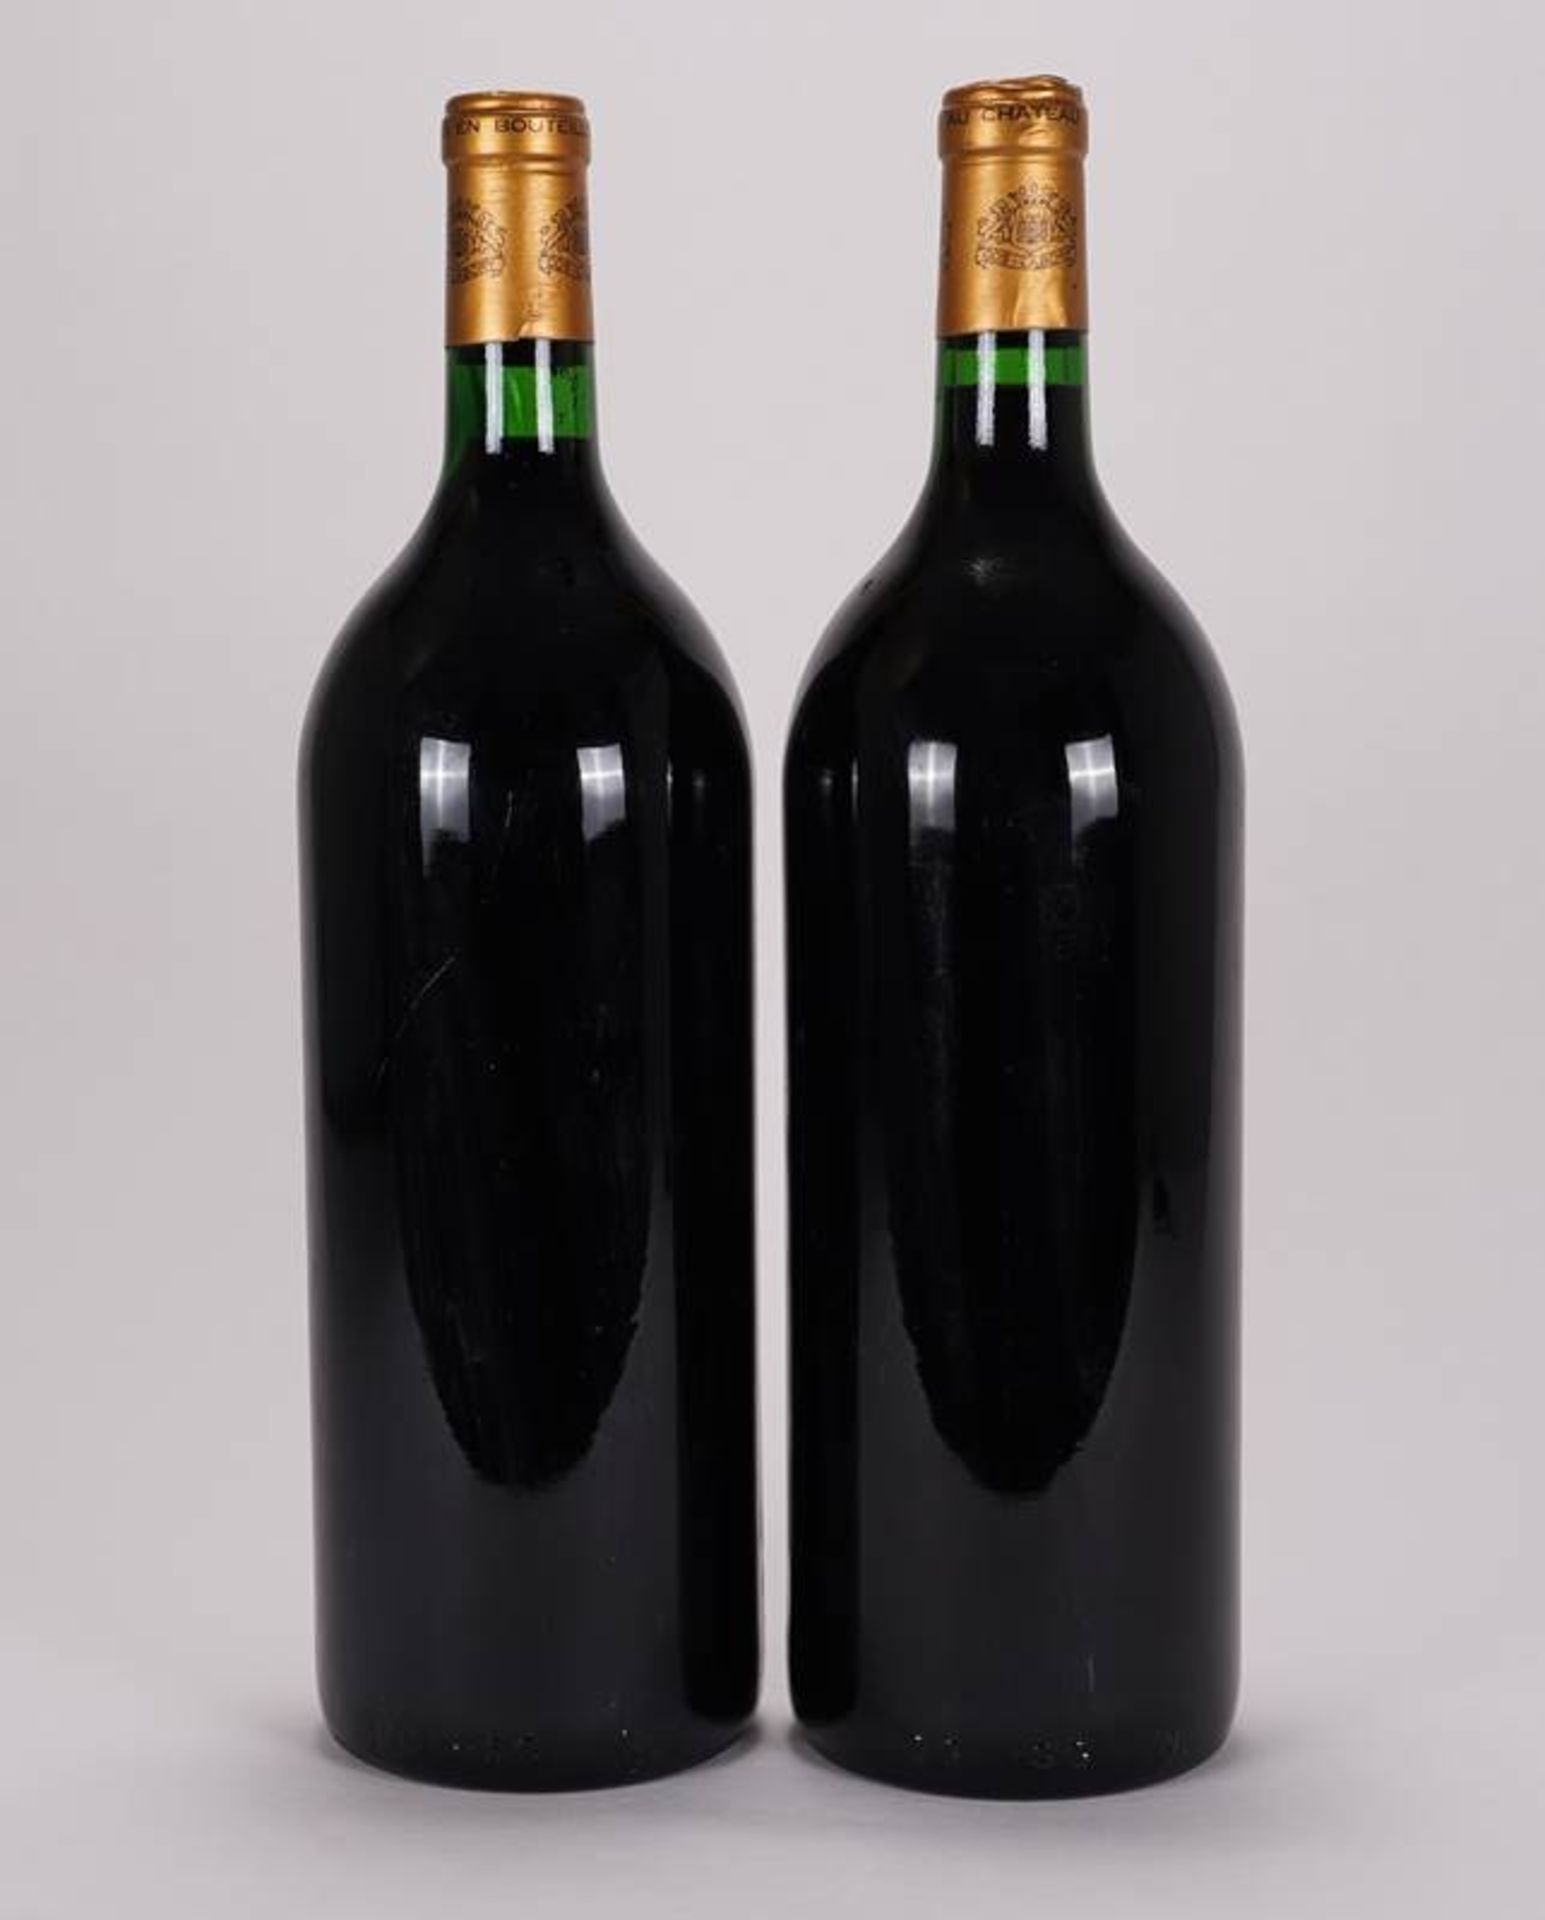 Two magnum bottles Chateau Cos Labory - Image 4 of 4